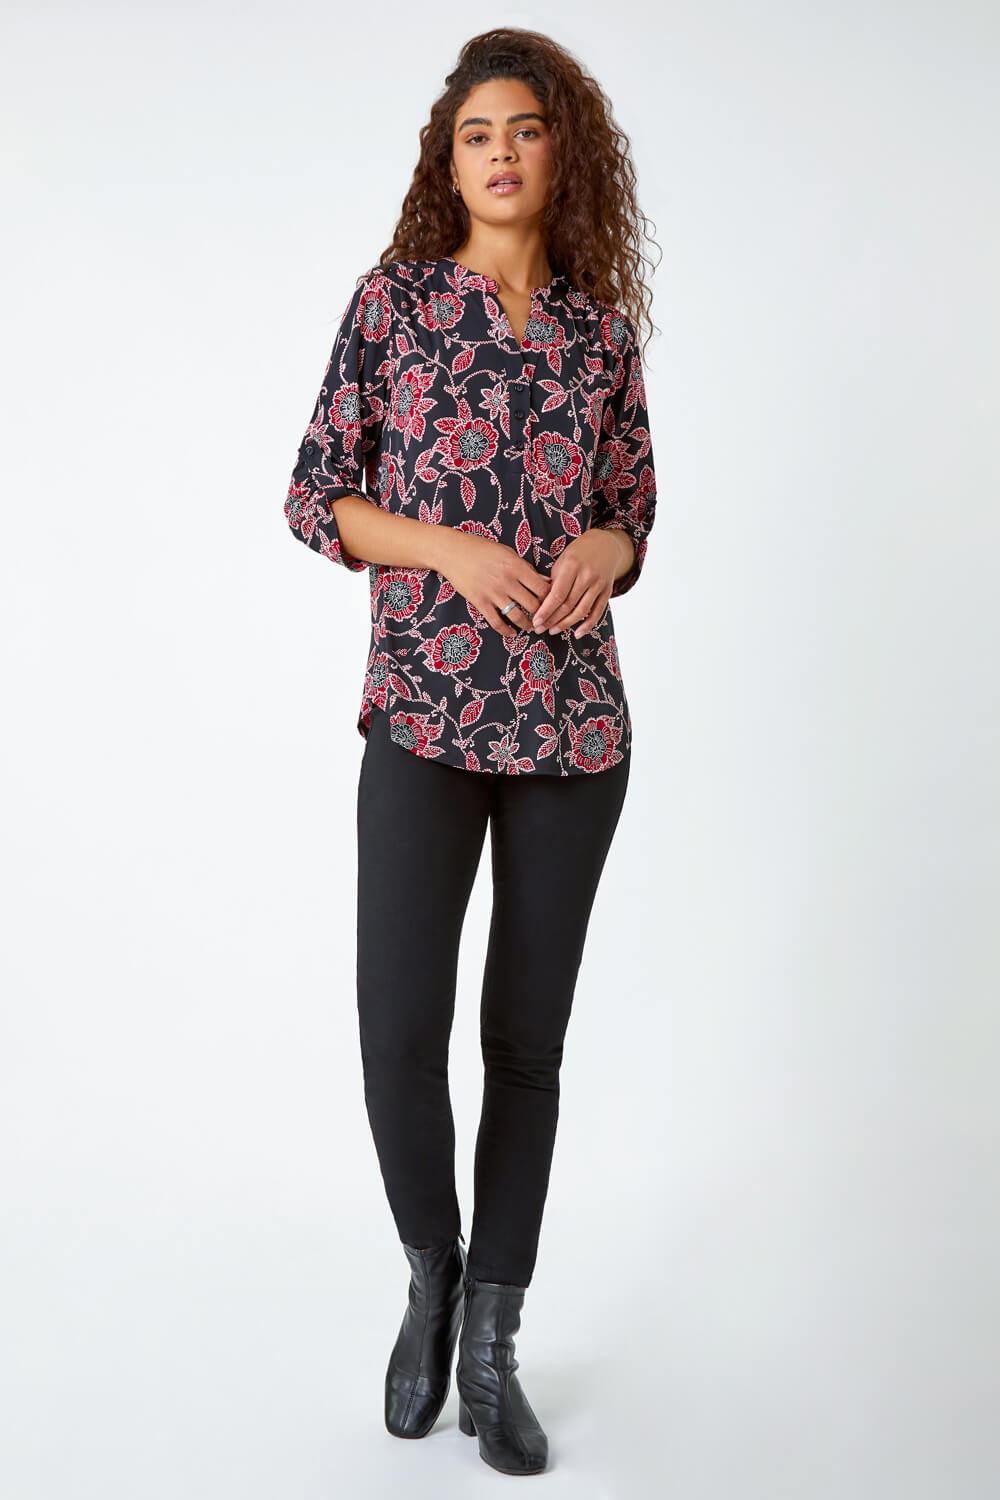 Red Textured Floral Print Stretch Shirt, Image 2 of 5